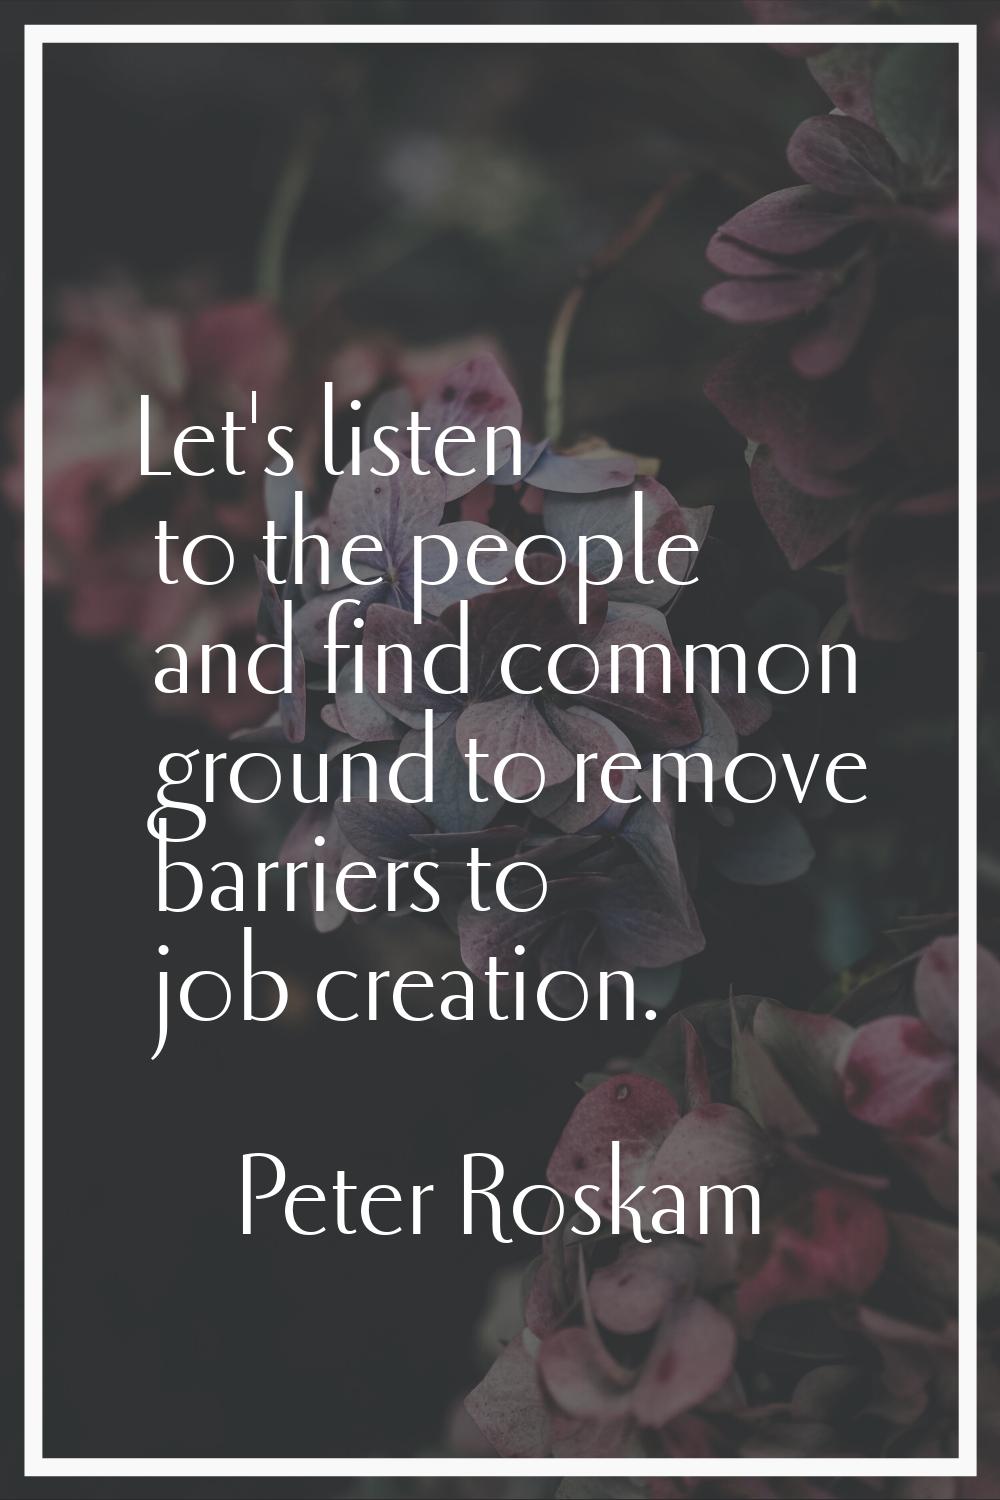 Let's listen to the people and find common ground to remove barriers to job creation.